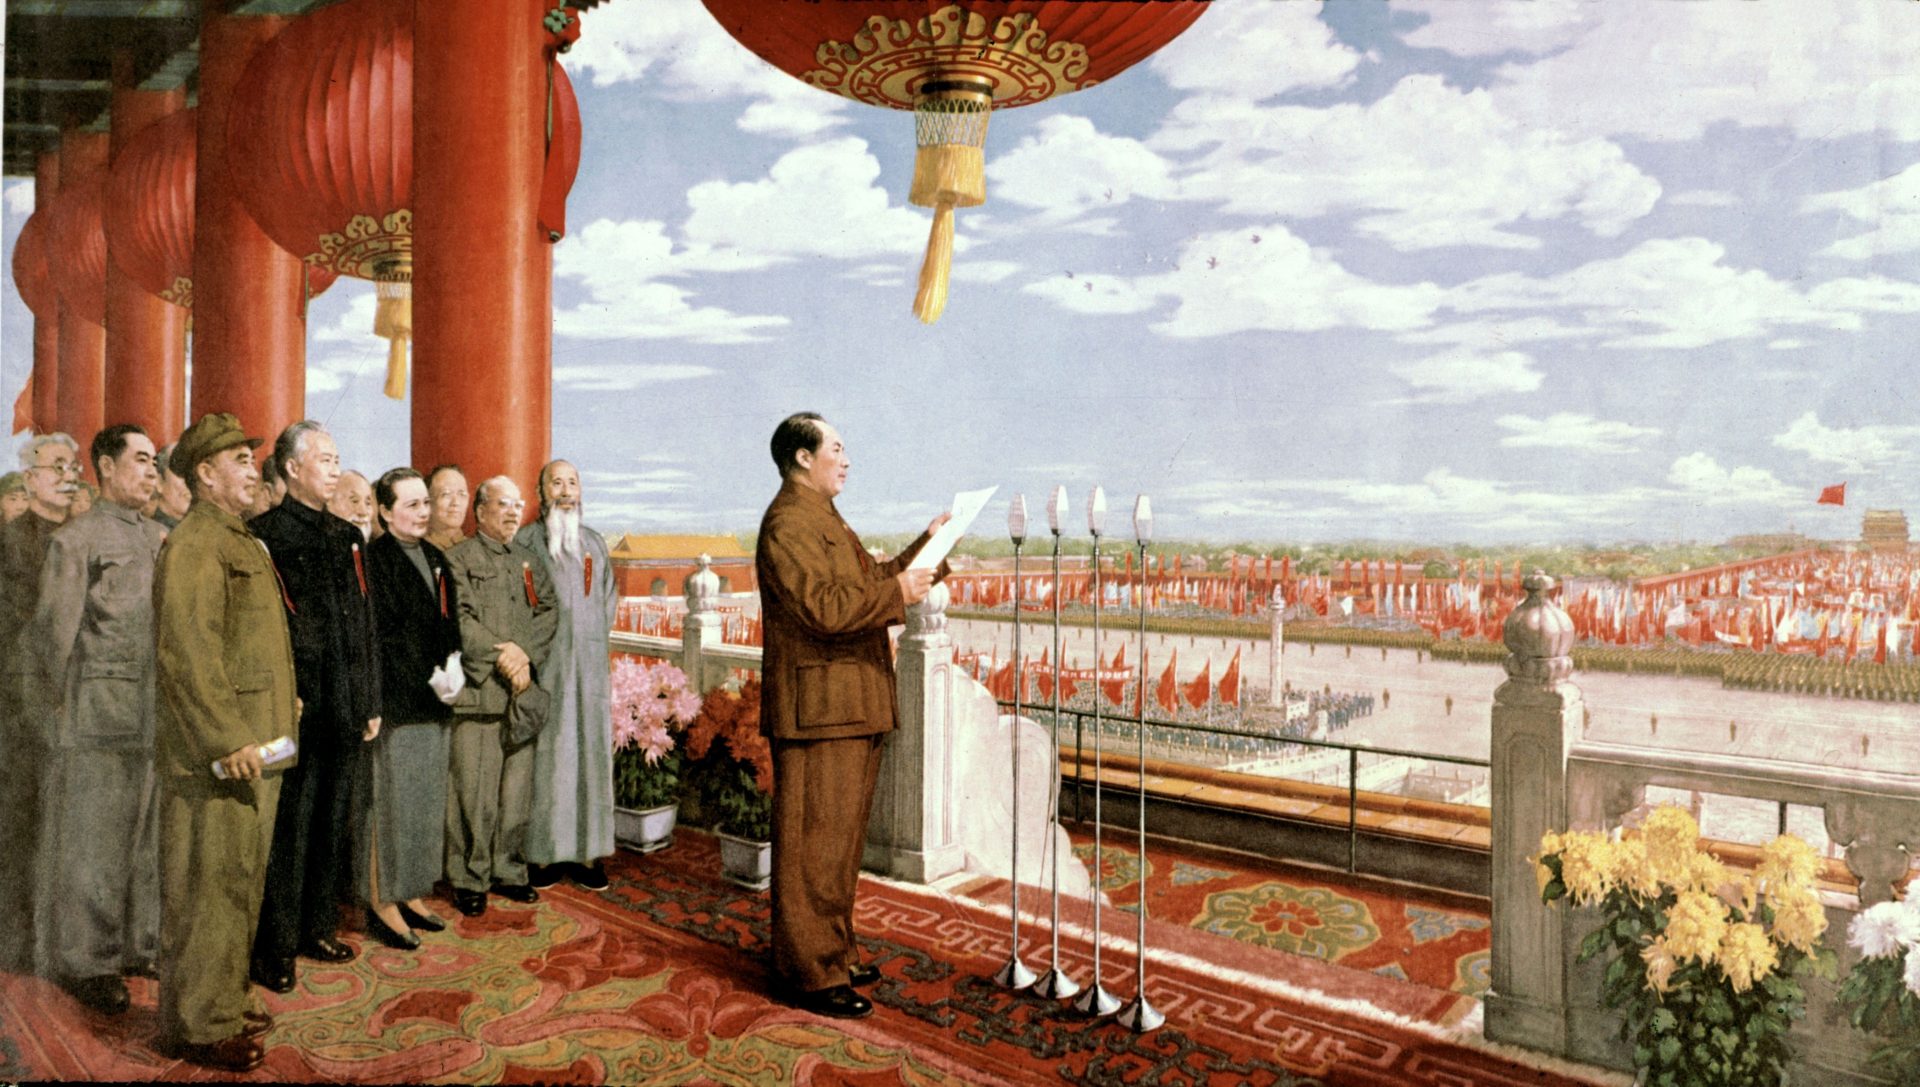 Mao Tse Tung annoucing the creation of Chinese Republic. Photo: Universal Images Group via Getty.